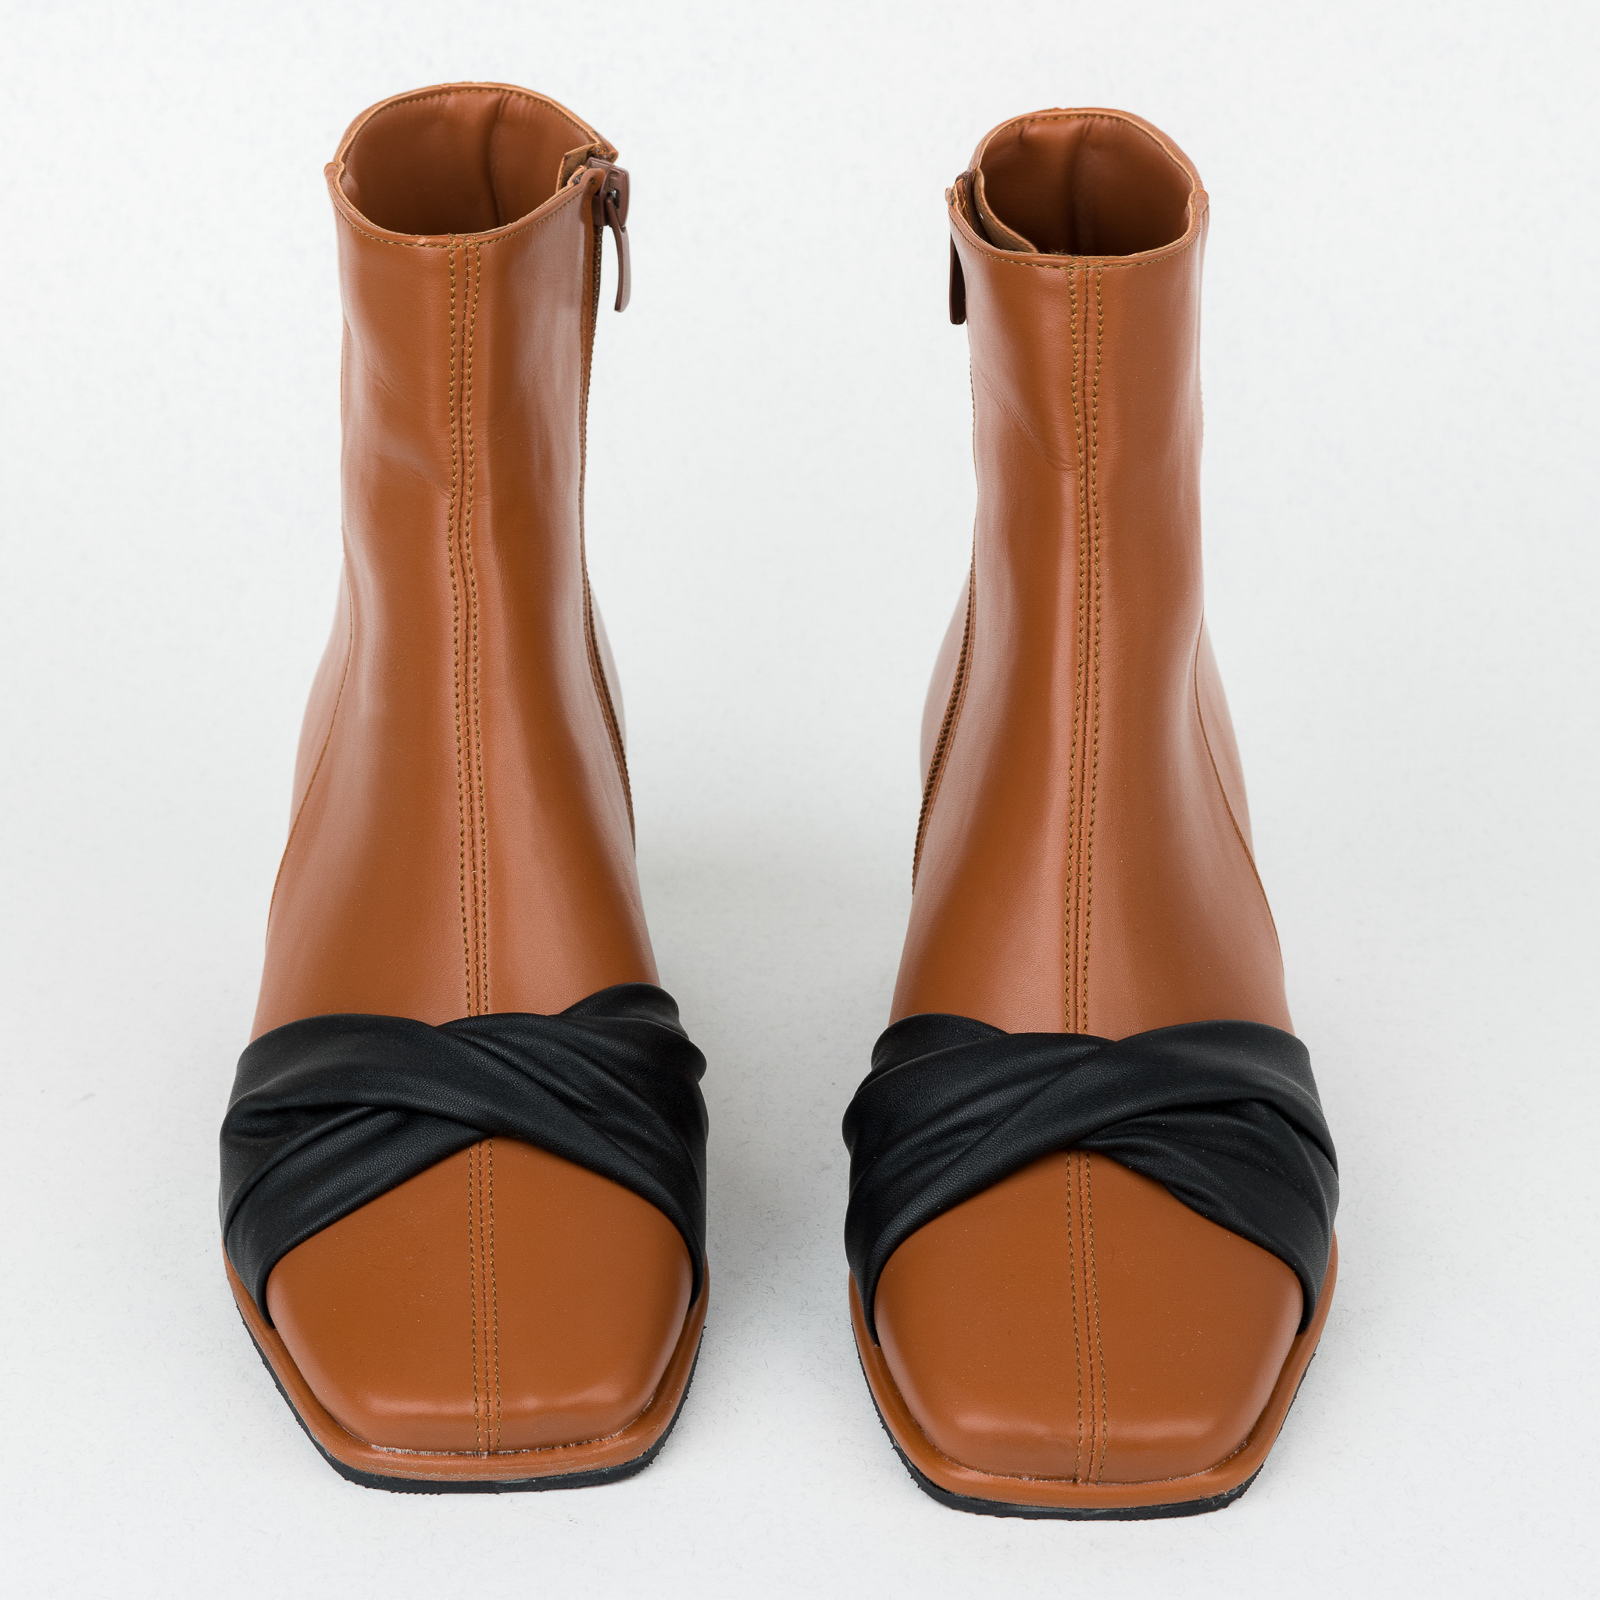 Women ankle boots B402 - CAMEL